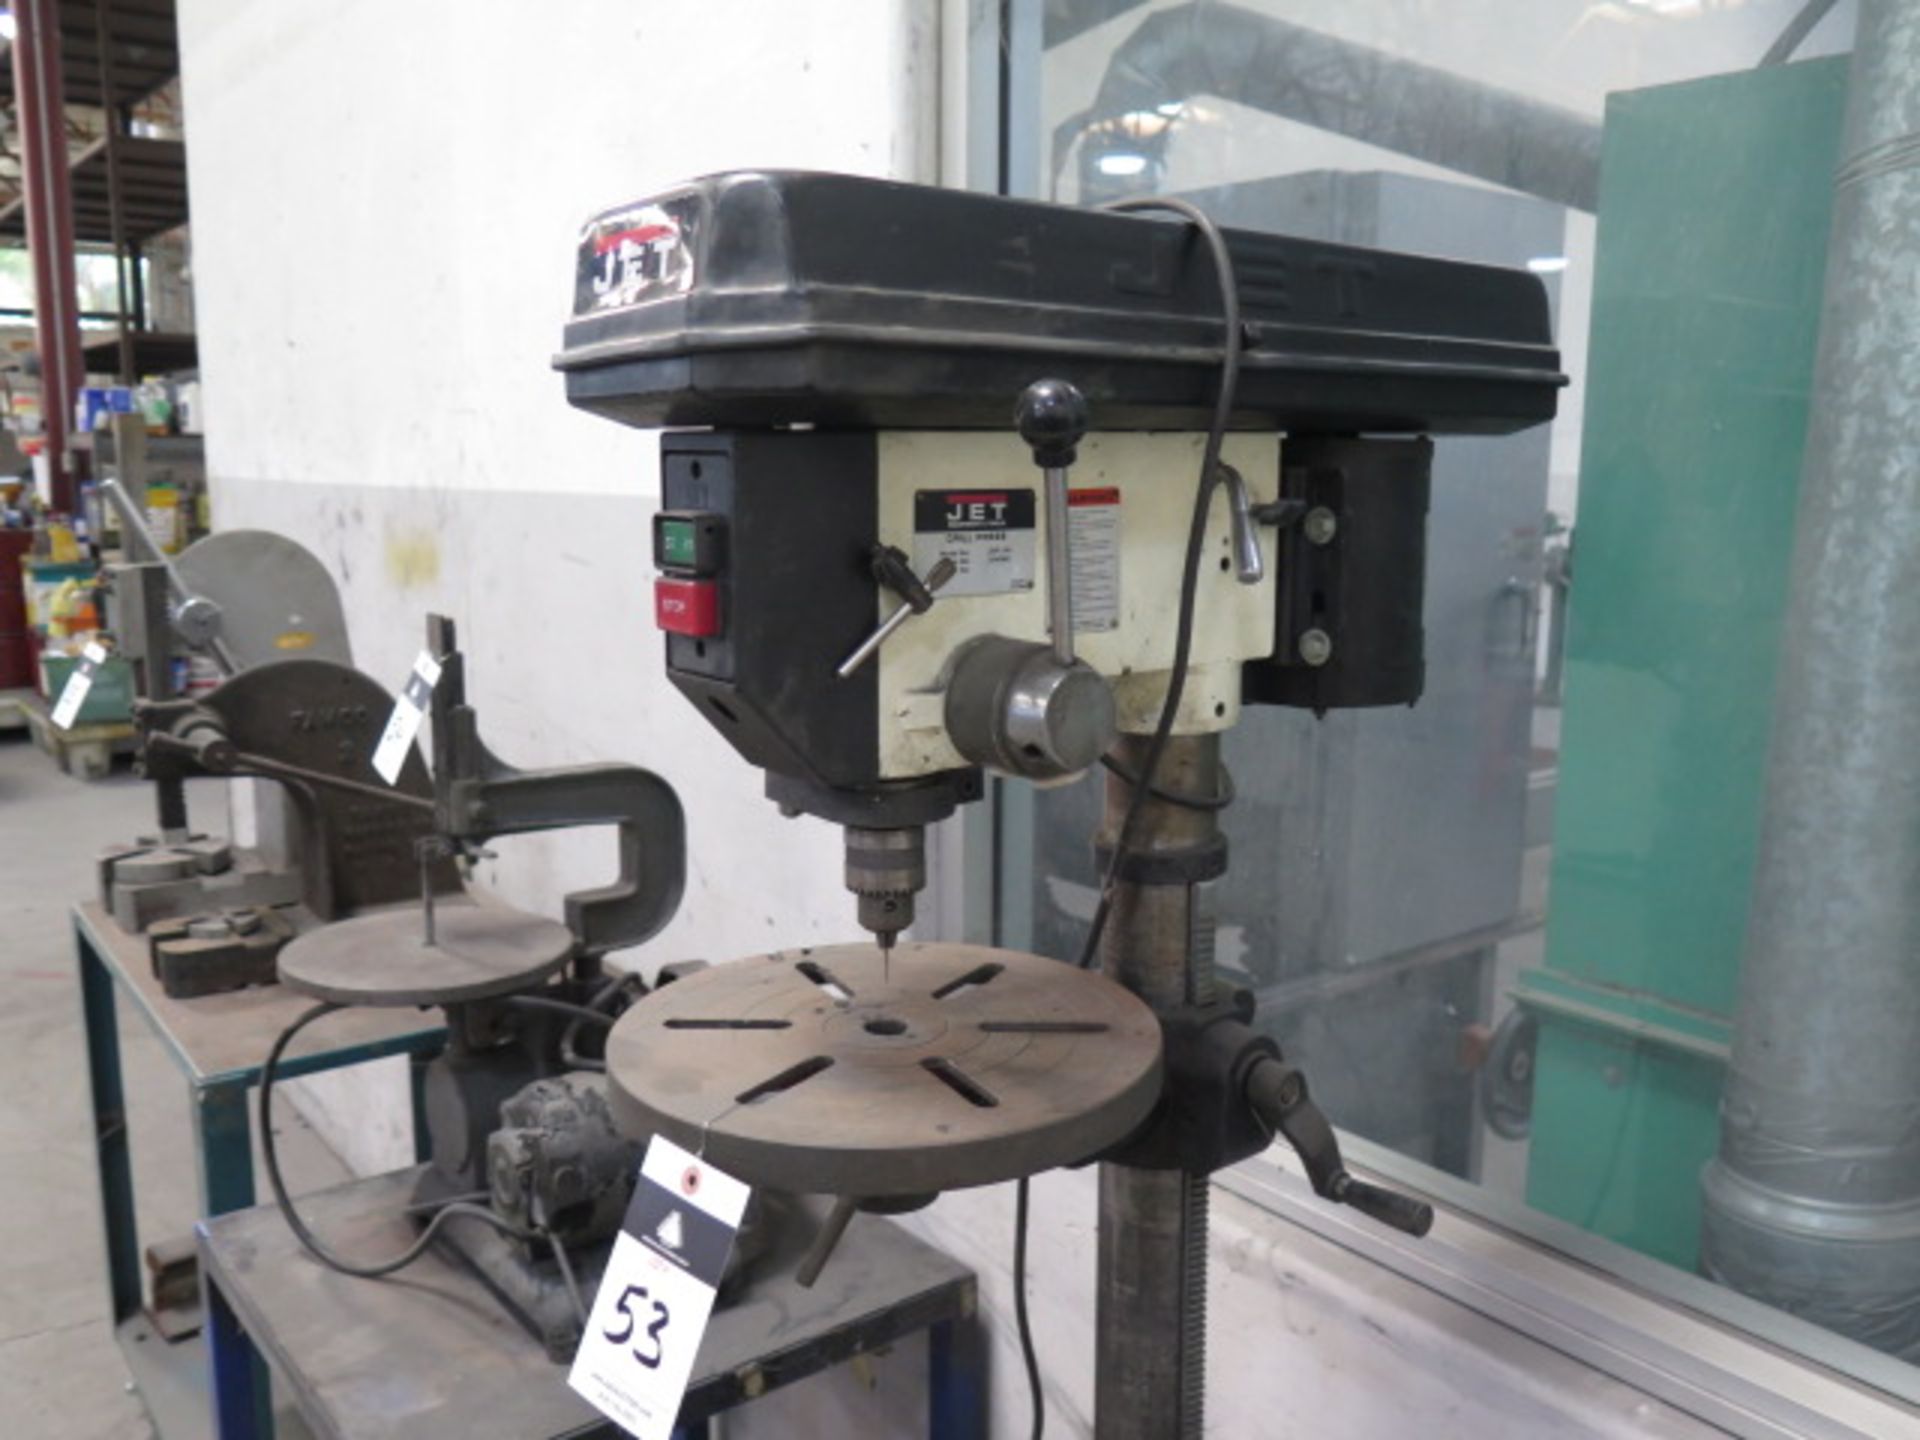 Jet Bench Model Drill Press w/ Cart (SOLD AS-IS - NO WARRANTY) - Image 2 of 5